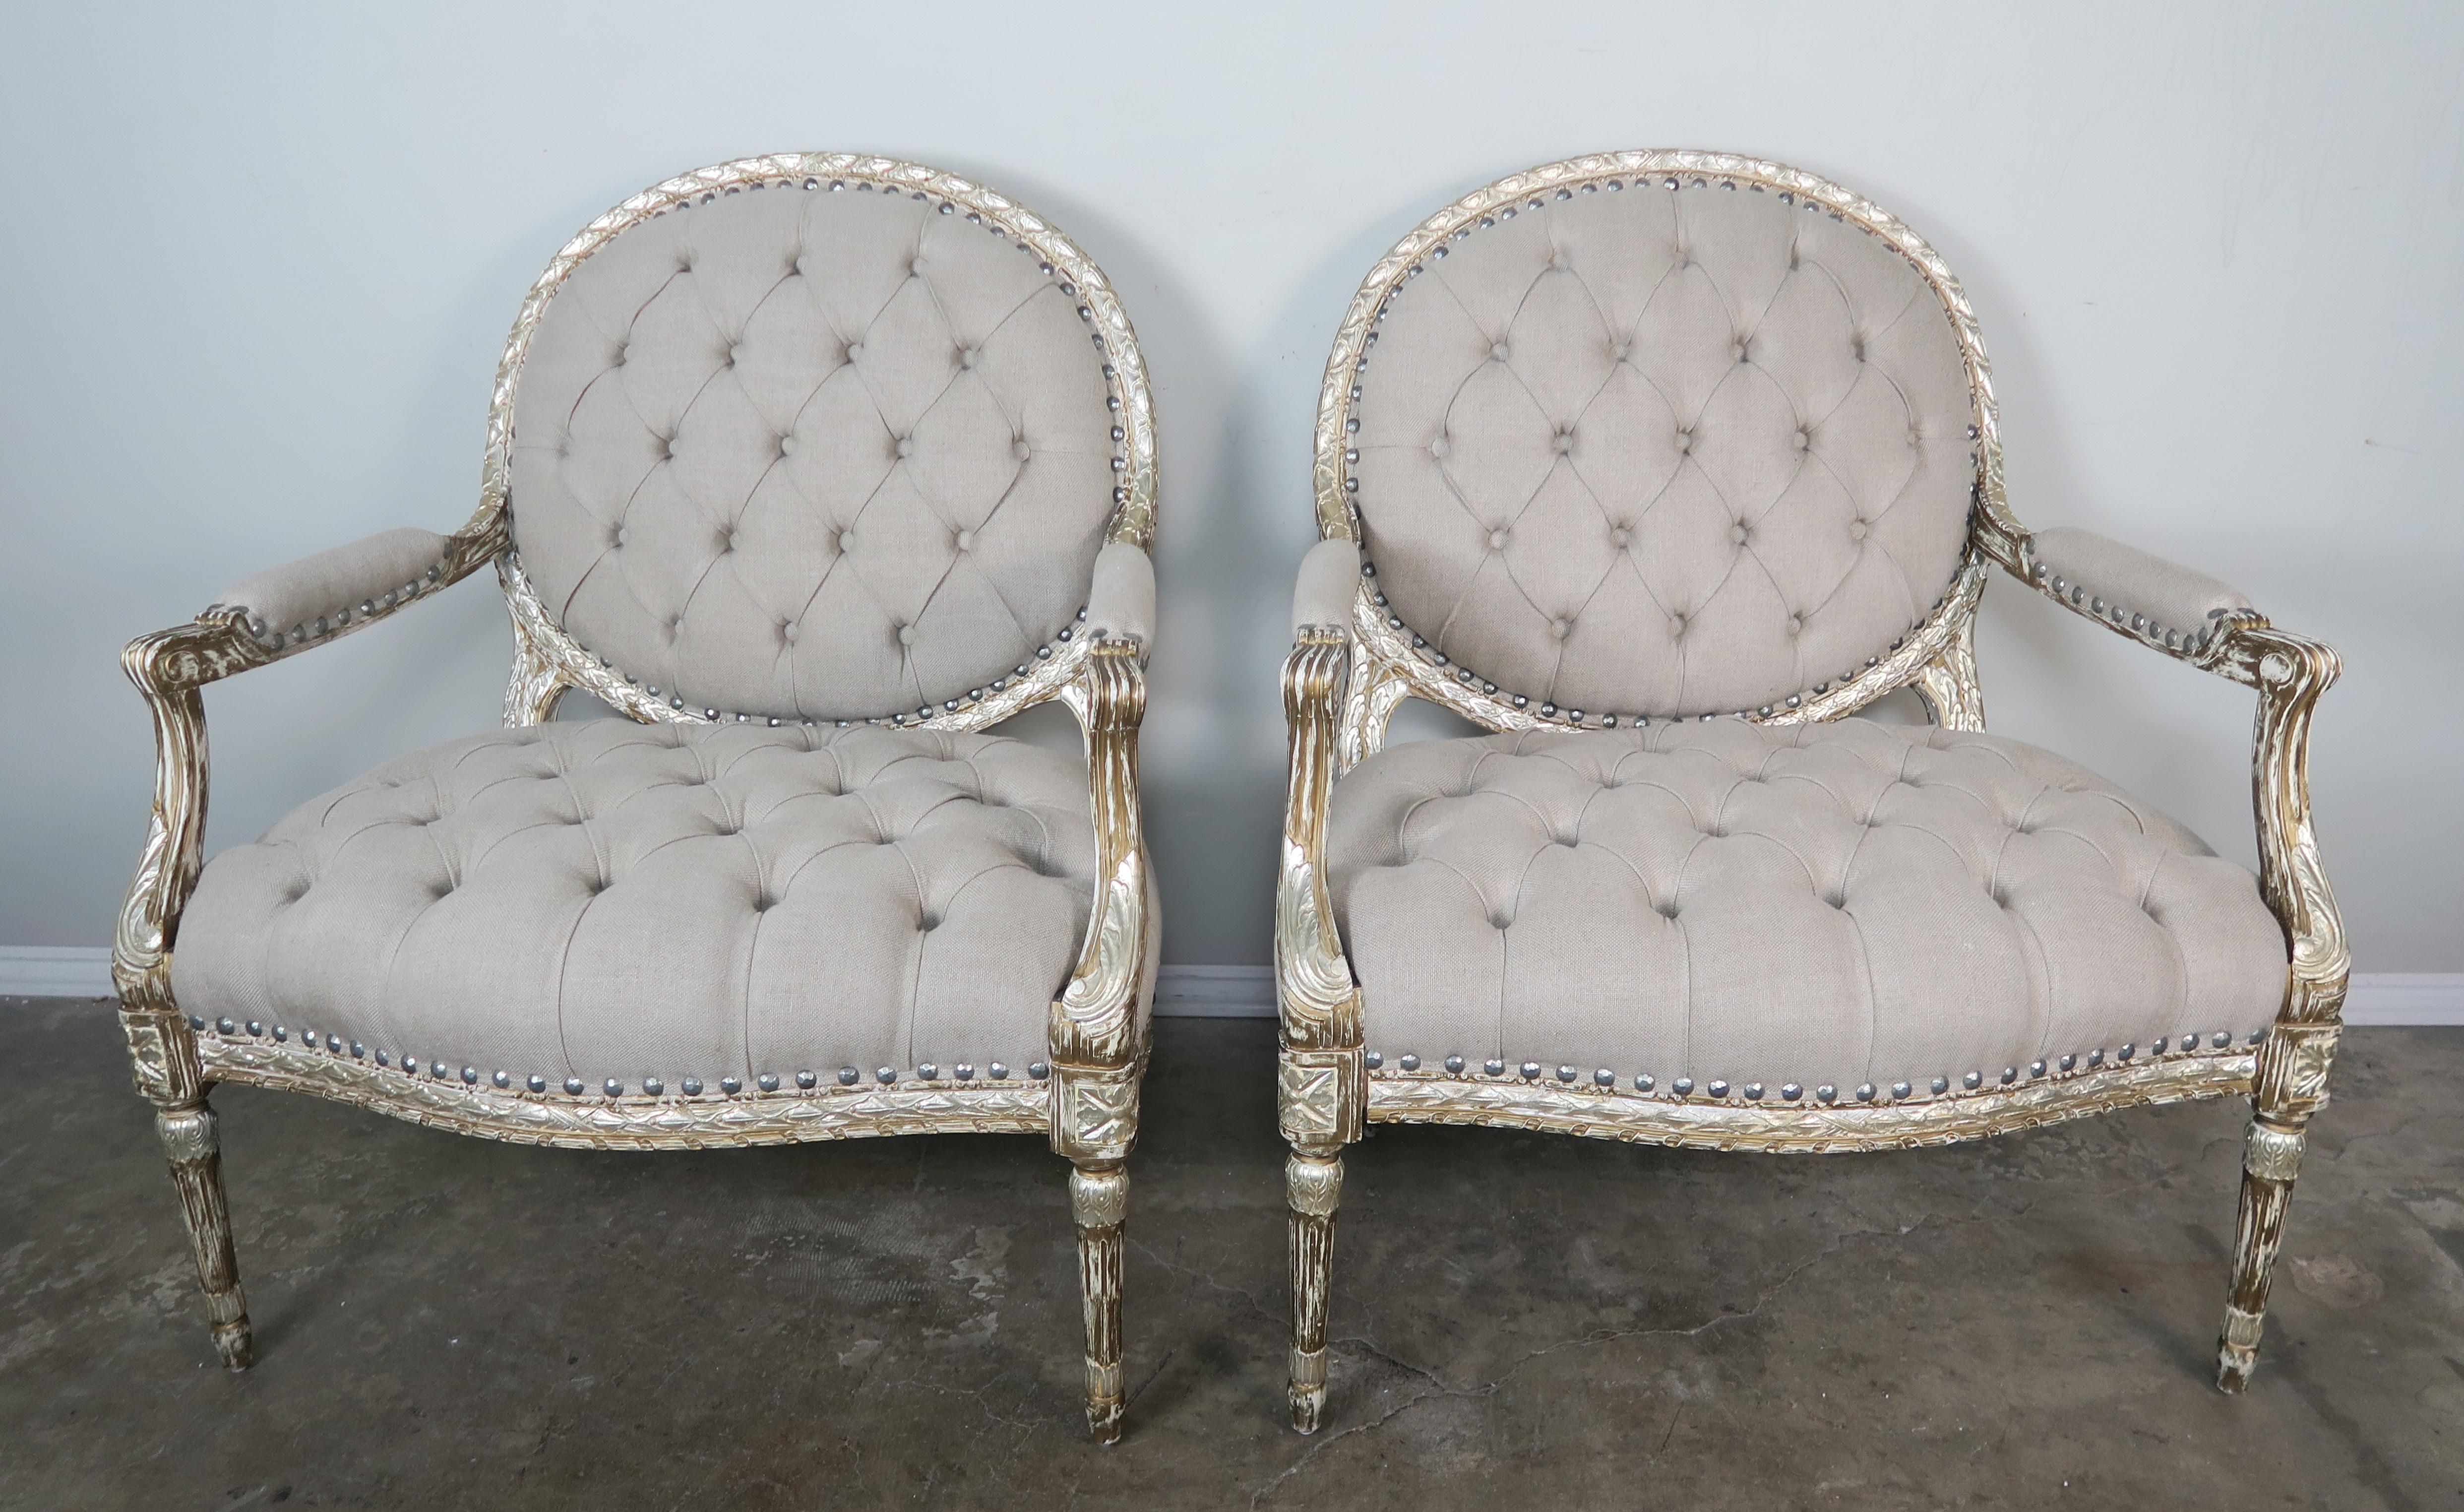 Pair of silver gilt carved neoclassical style armchairs newly upholstered in a tufted washed oatmeal coloration. When you.